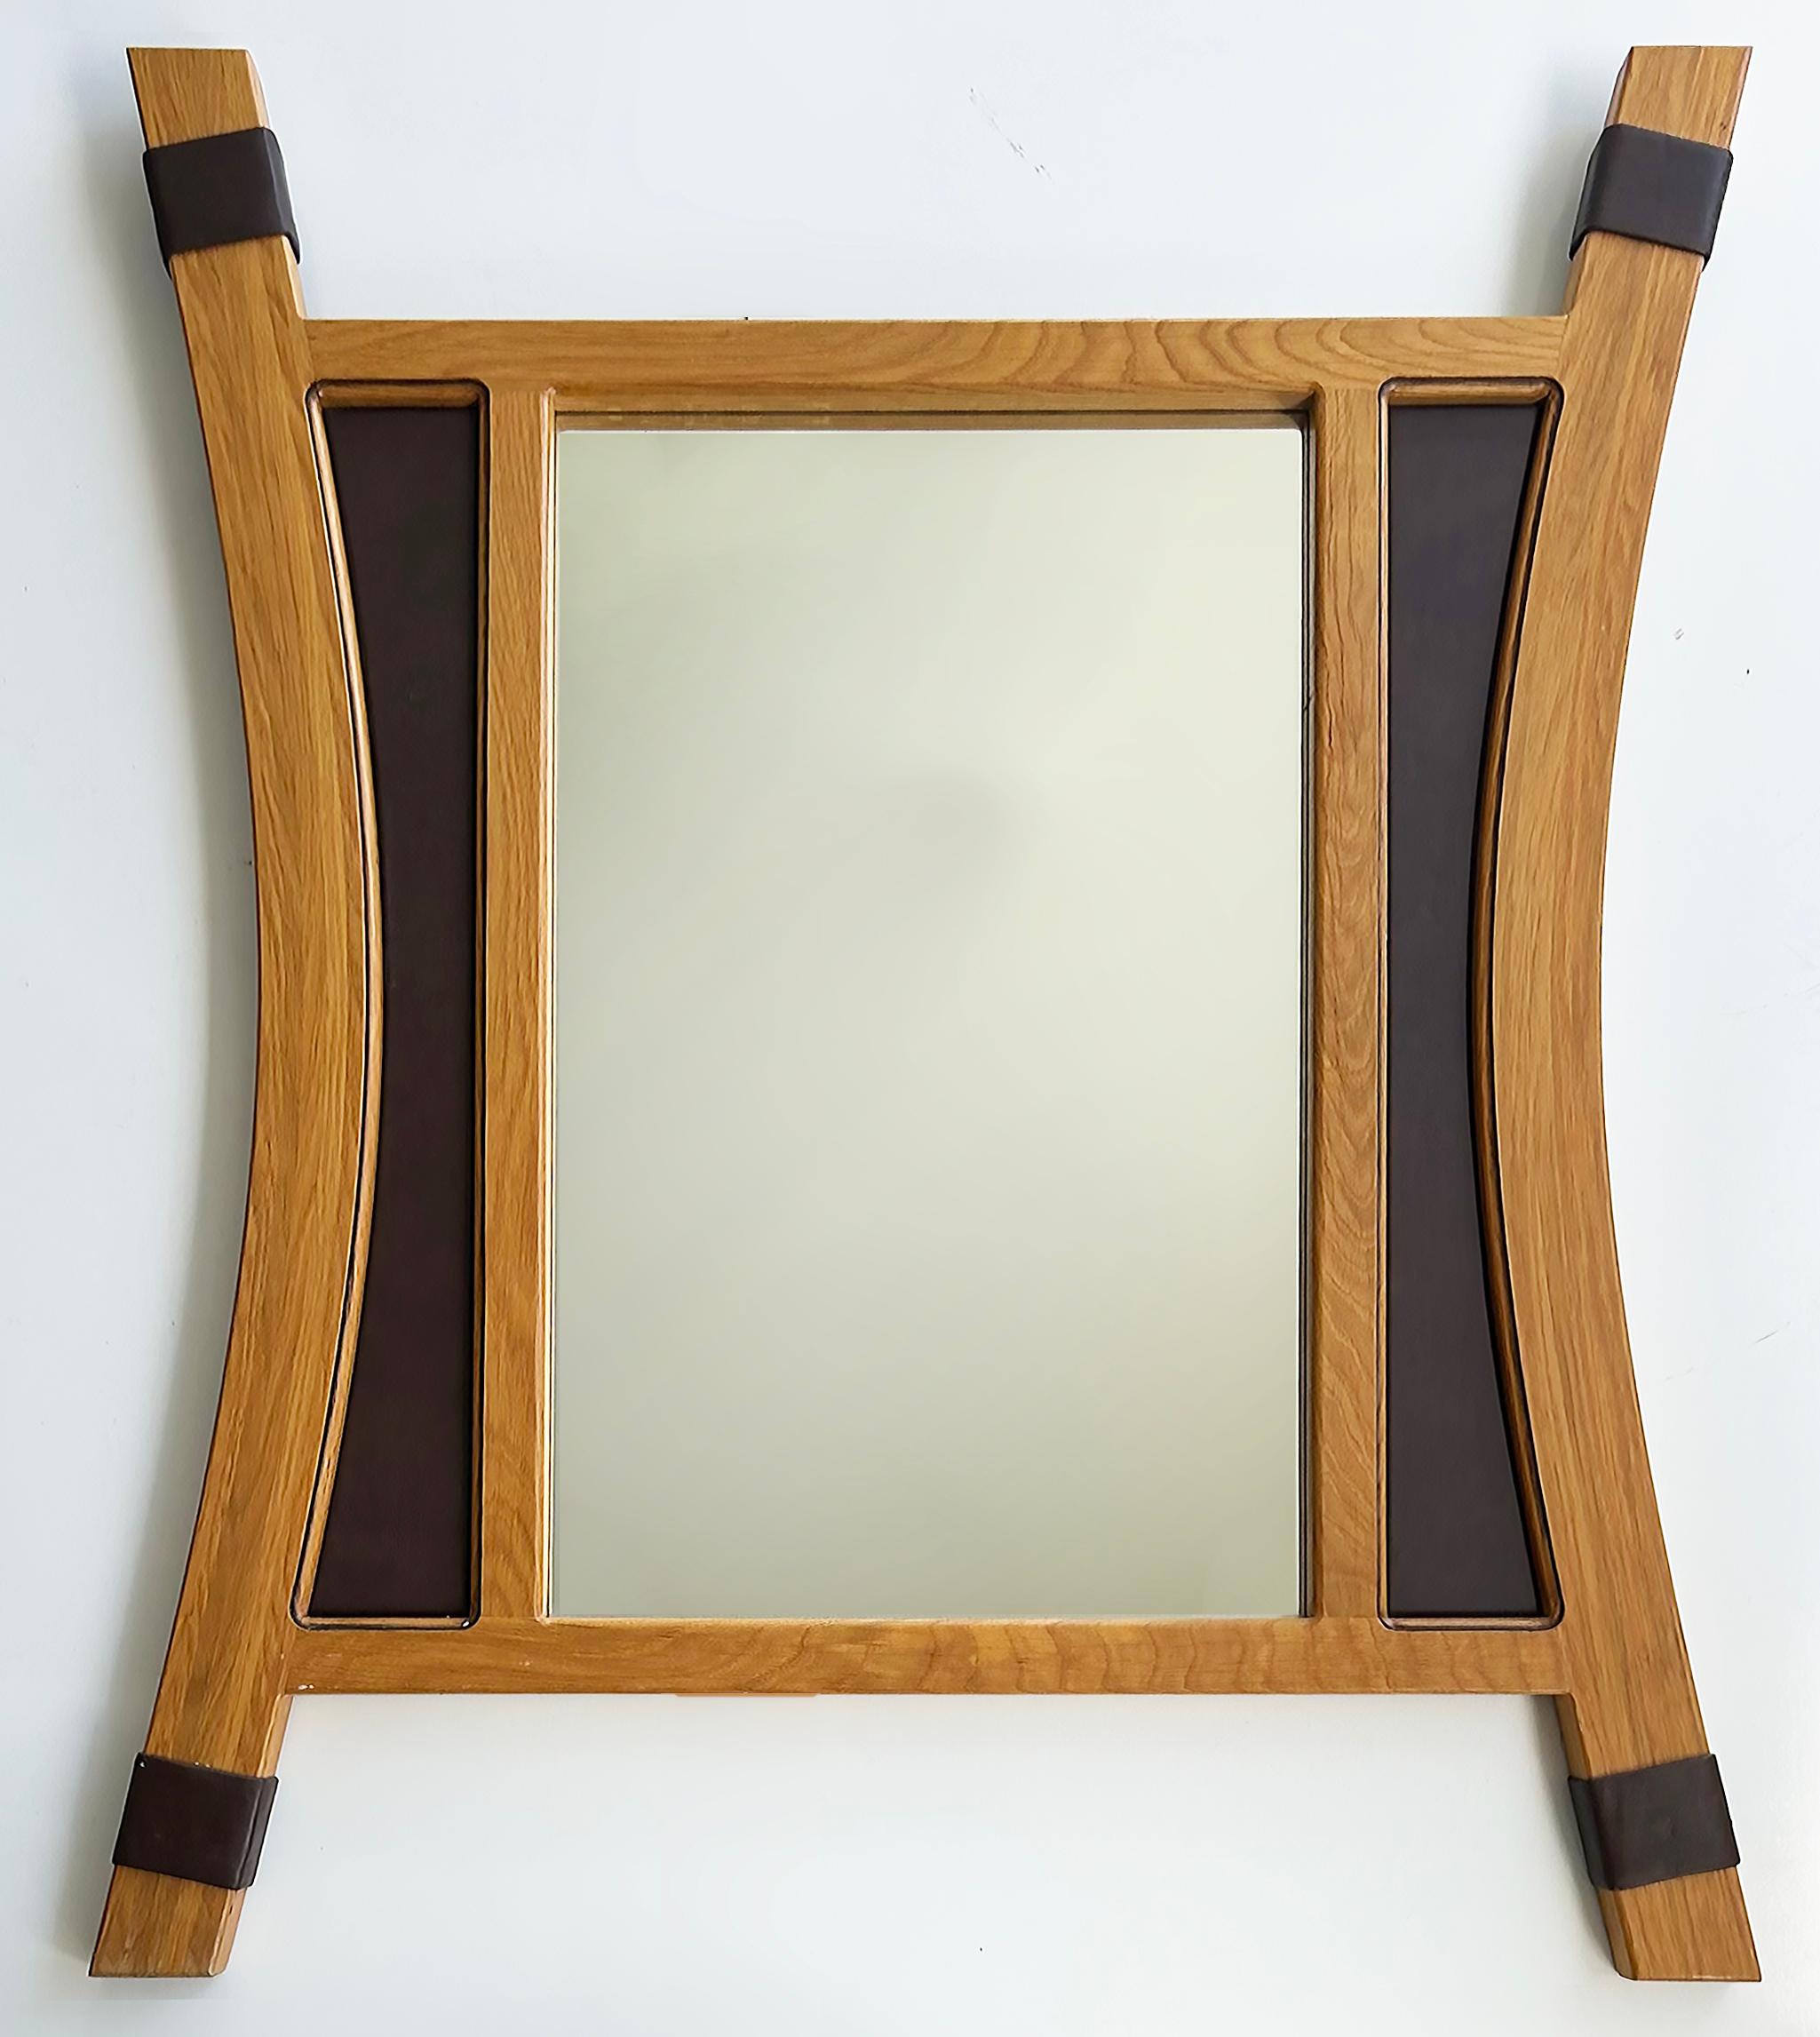 2012 Artist Signed Oak and Leather Studio Crafted Wall Mirror  In Good Condition For Sale In Miami, FL